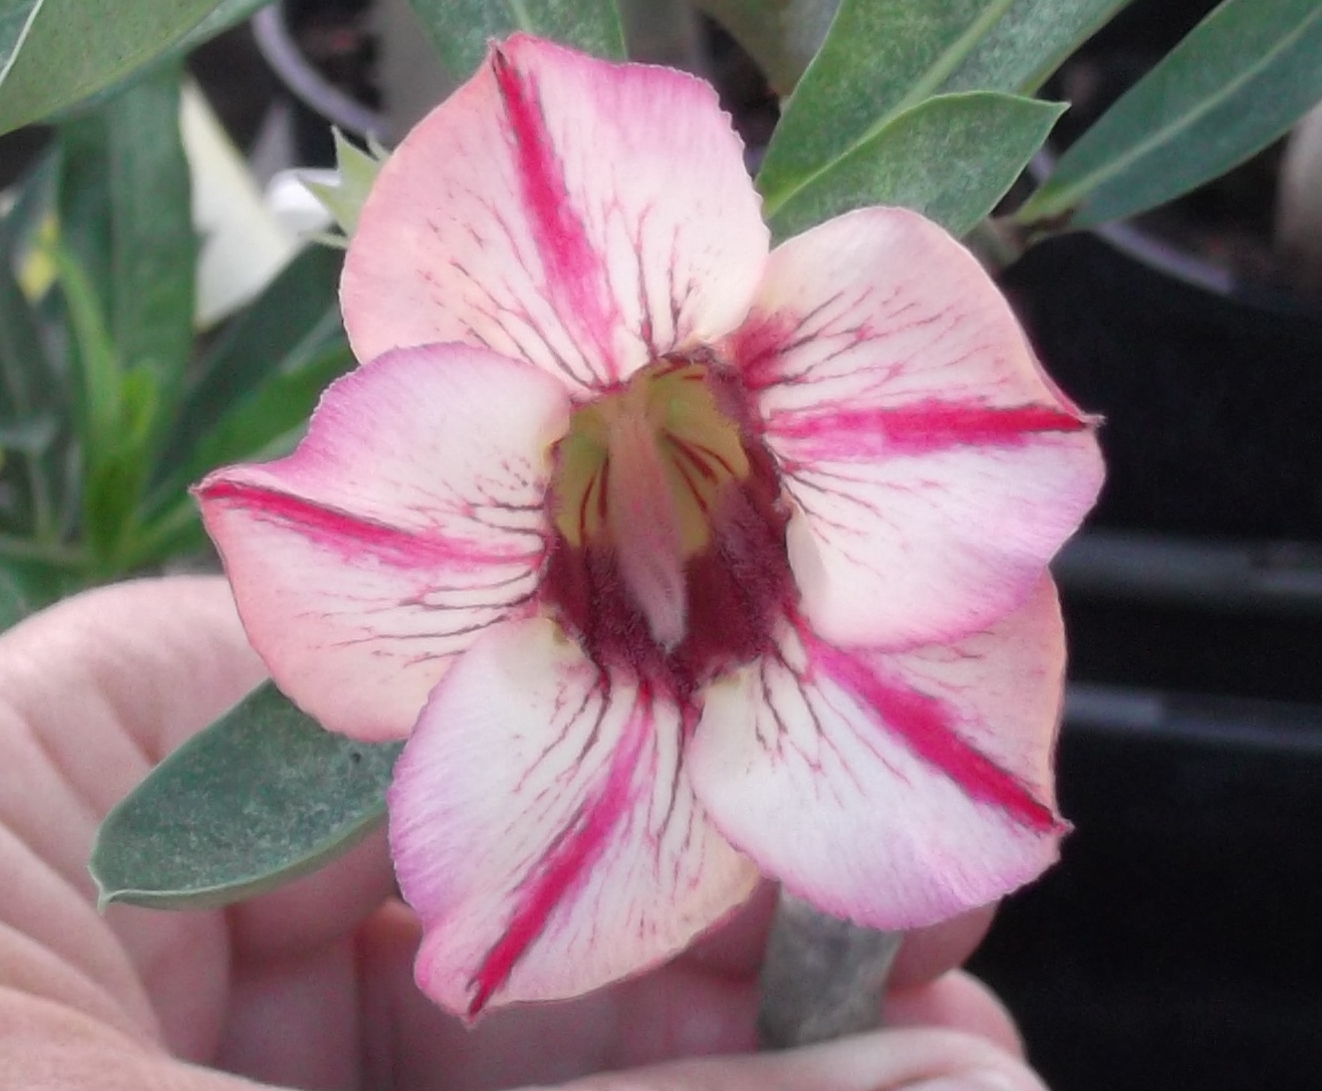 All About Desert Roses, Pinder's Nursery